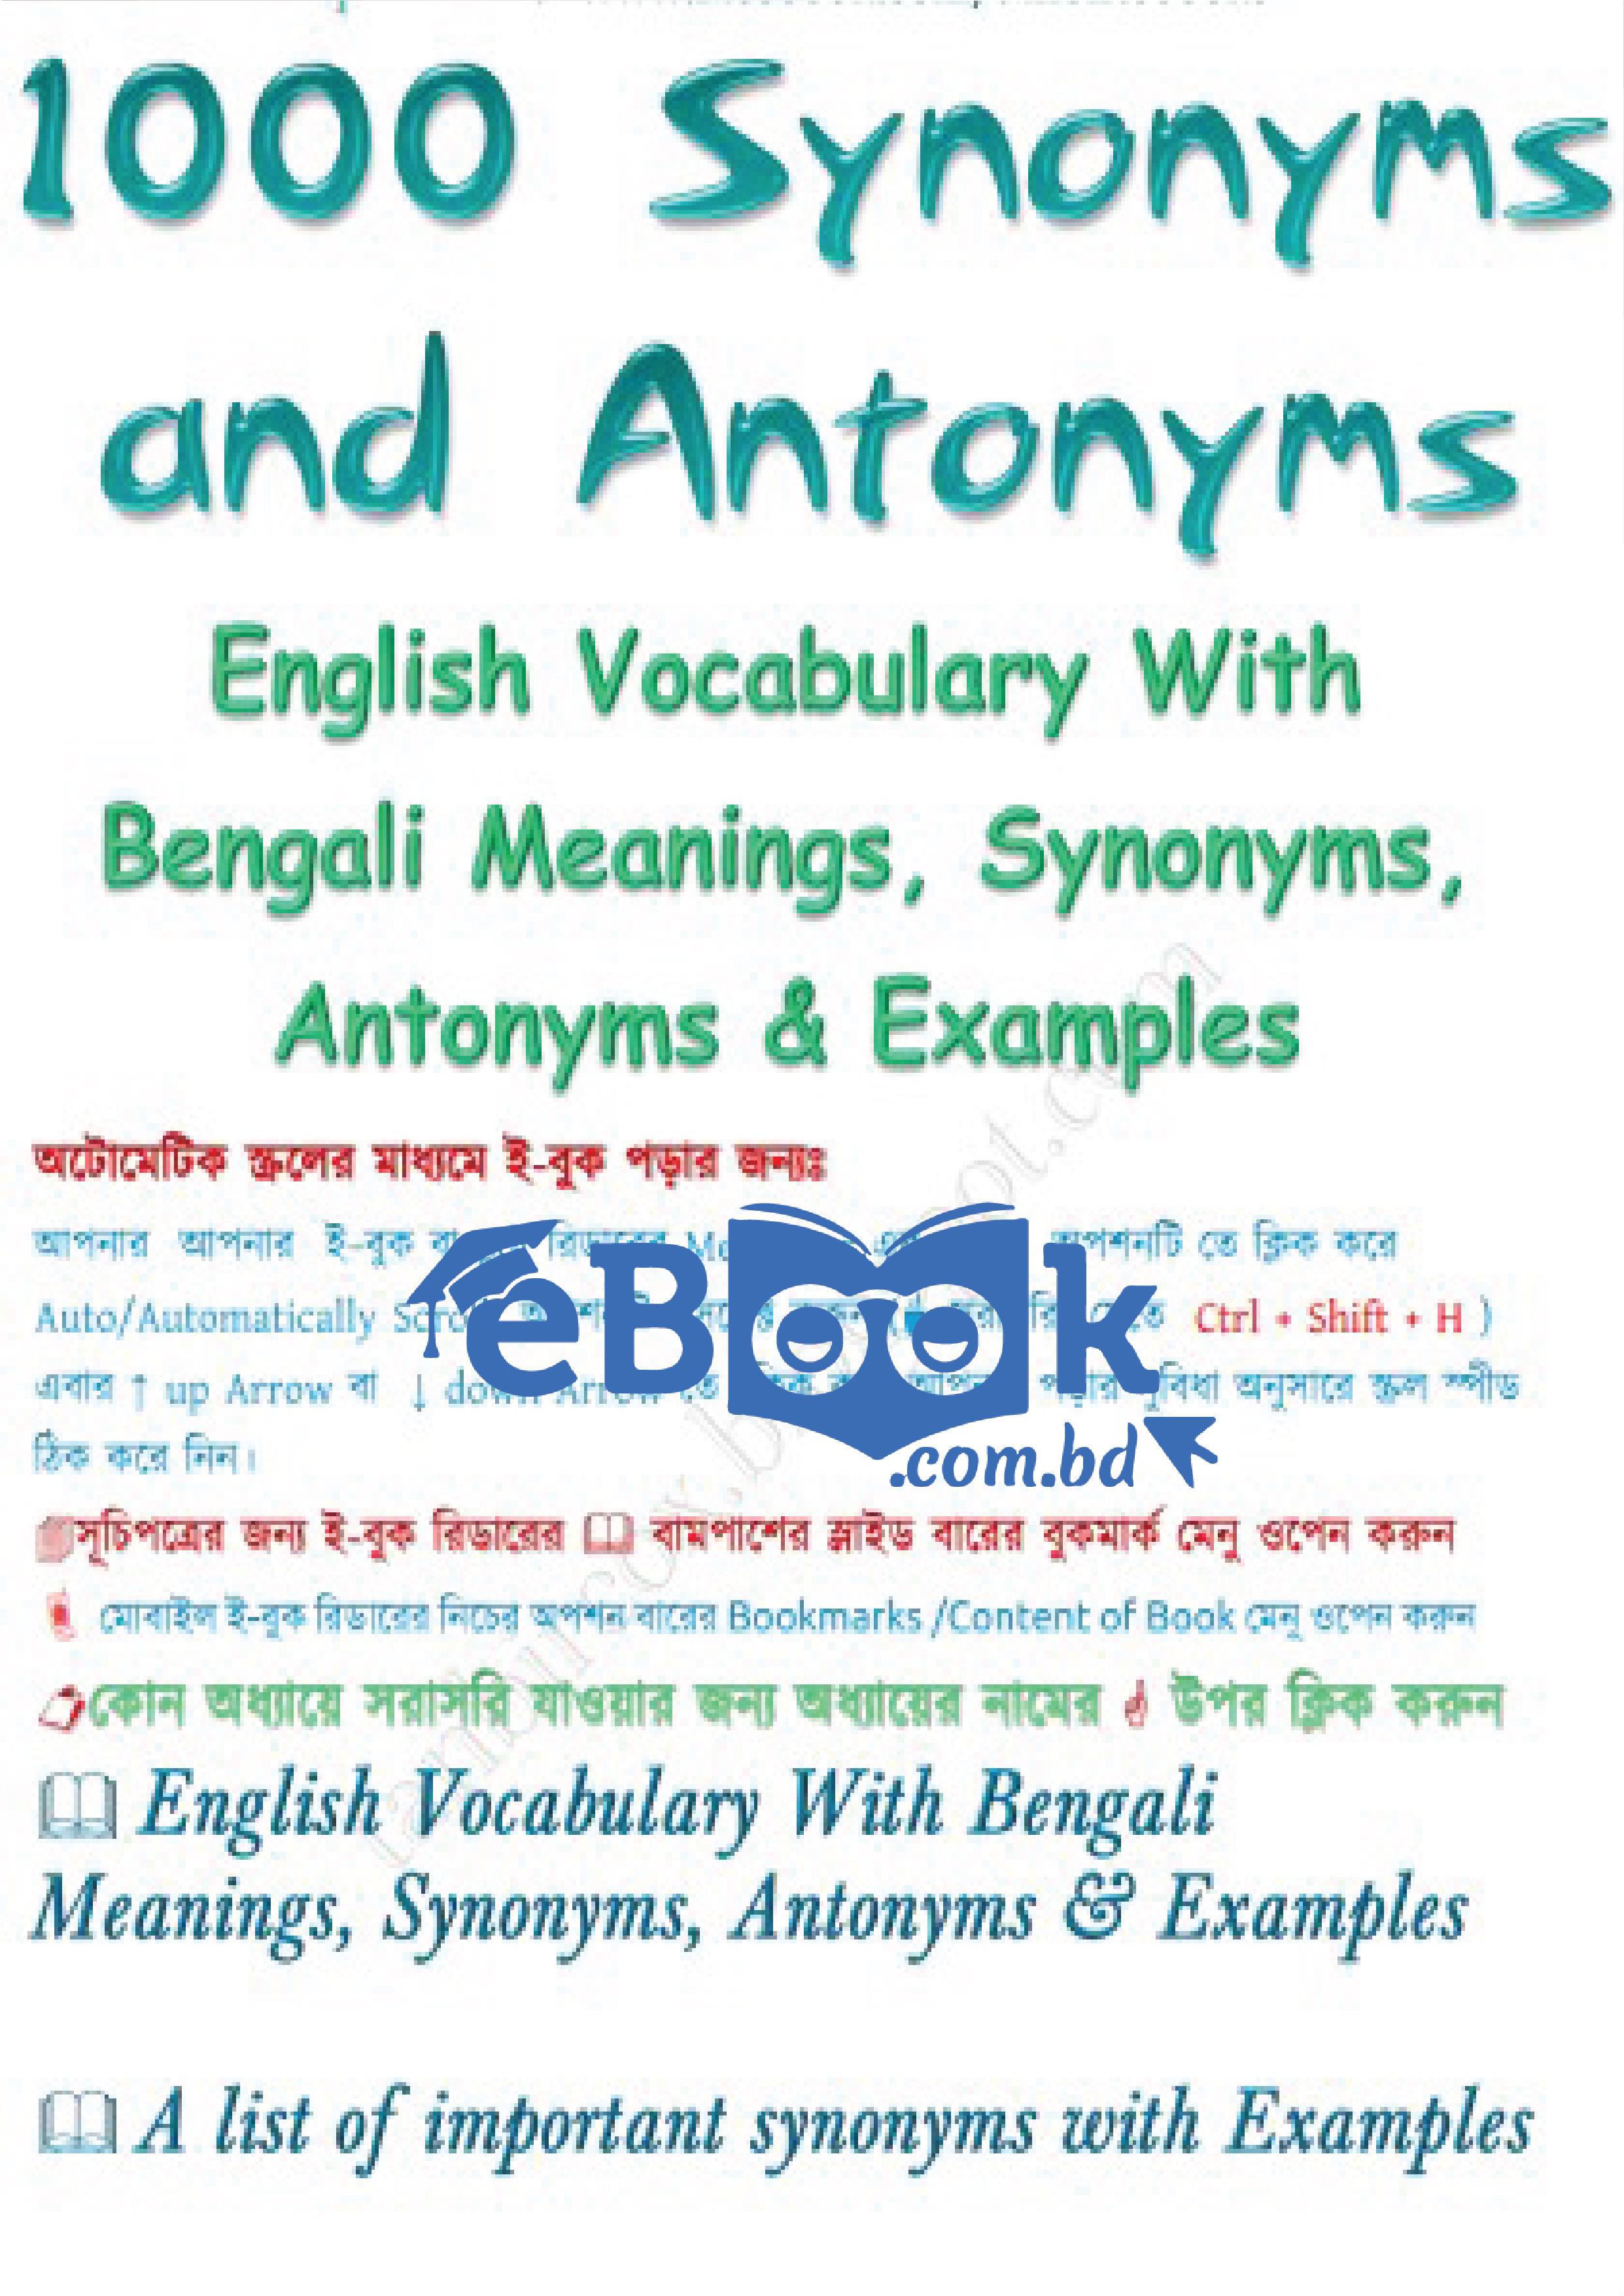 Thumbnail of 1000 Synonyms and Antonyms